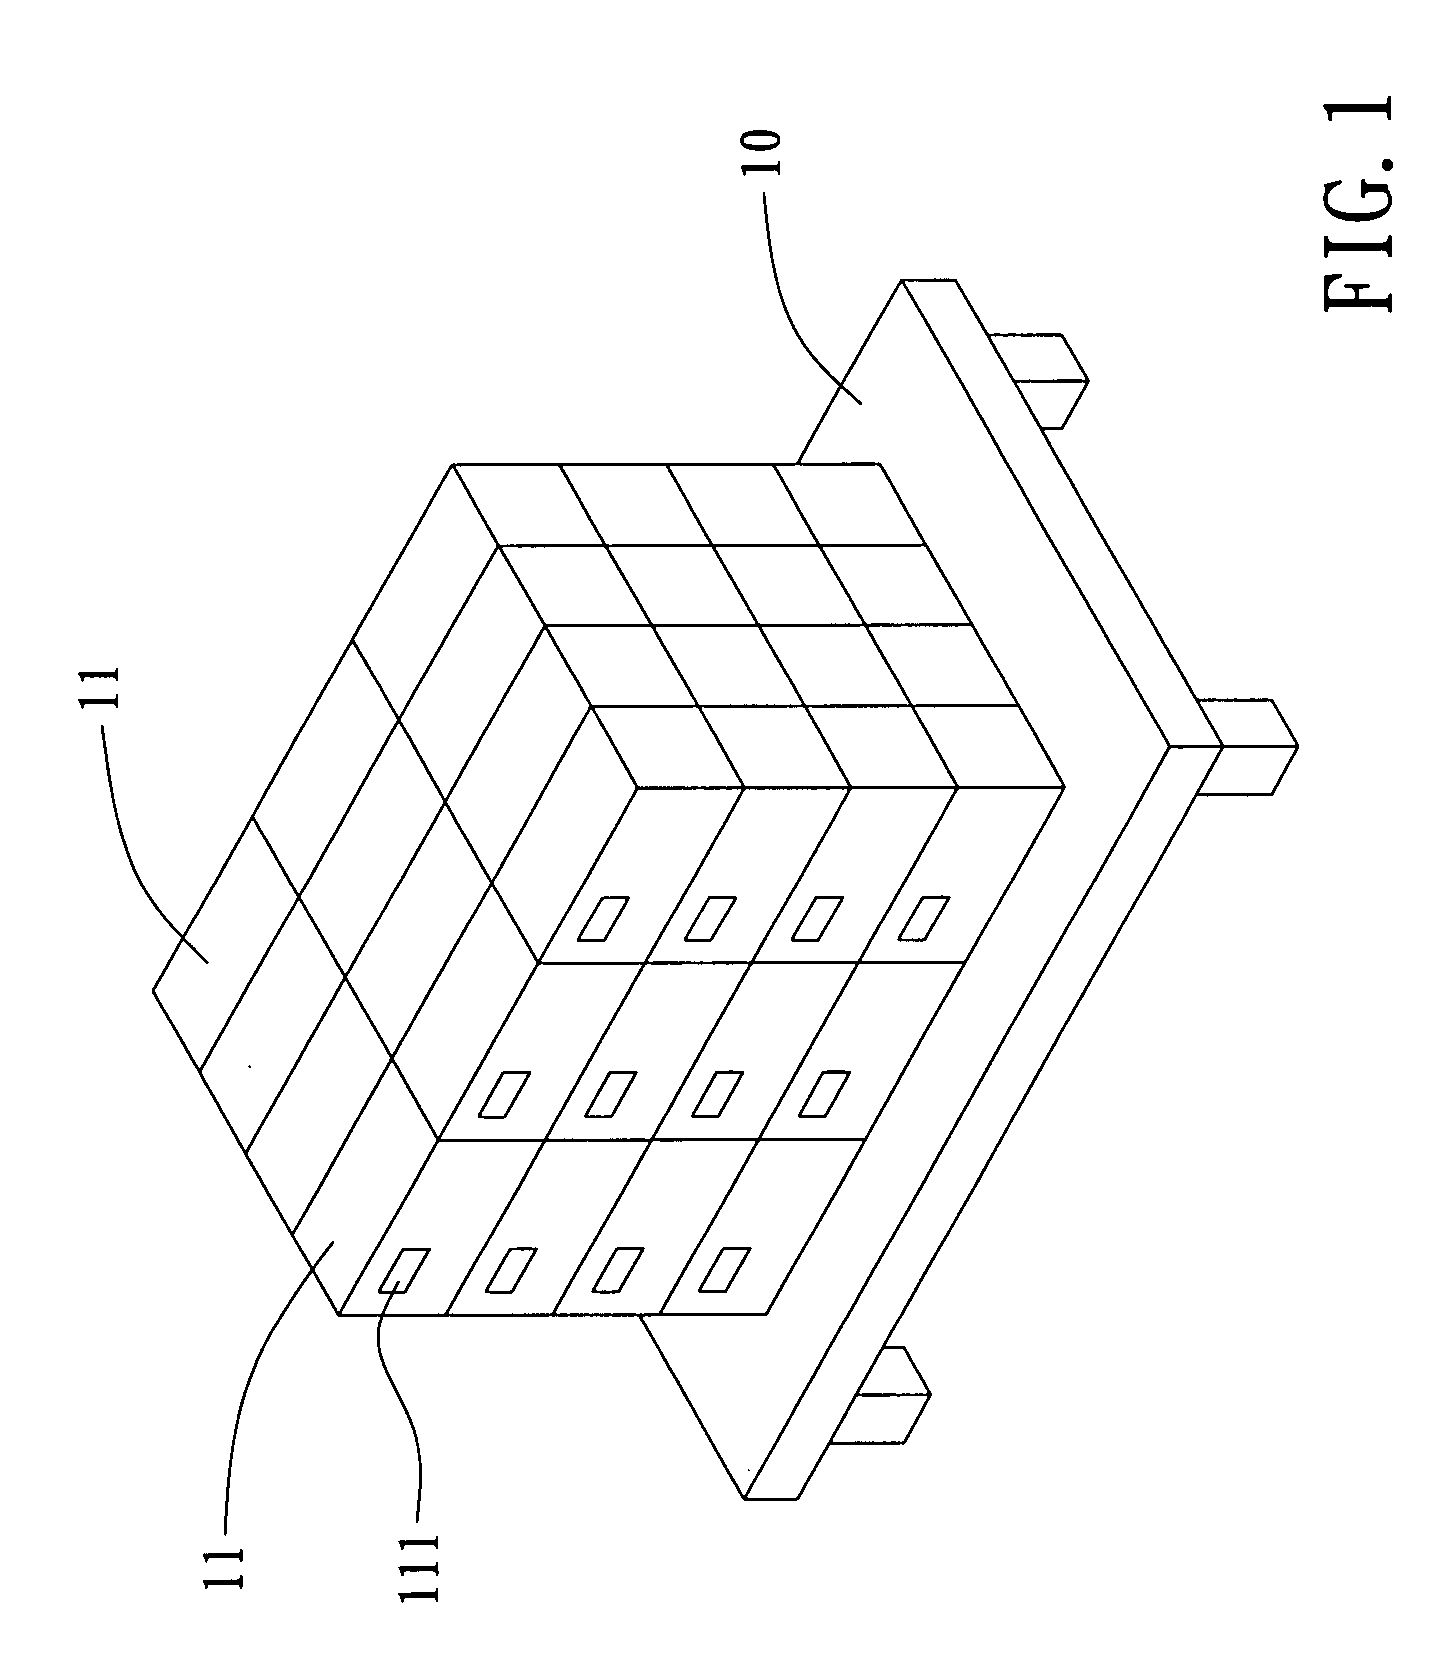 Method and system for reading and identifying RFID tag